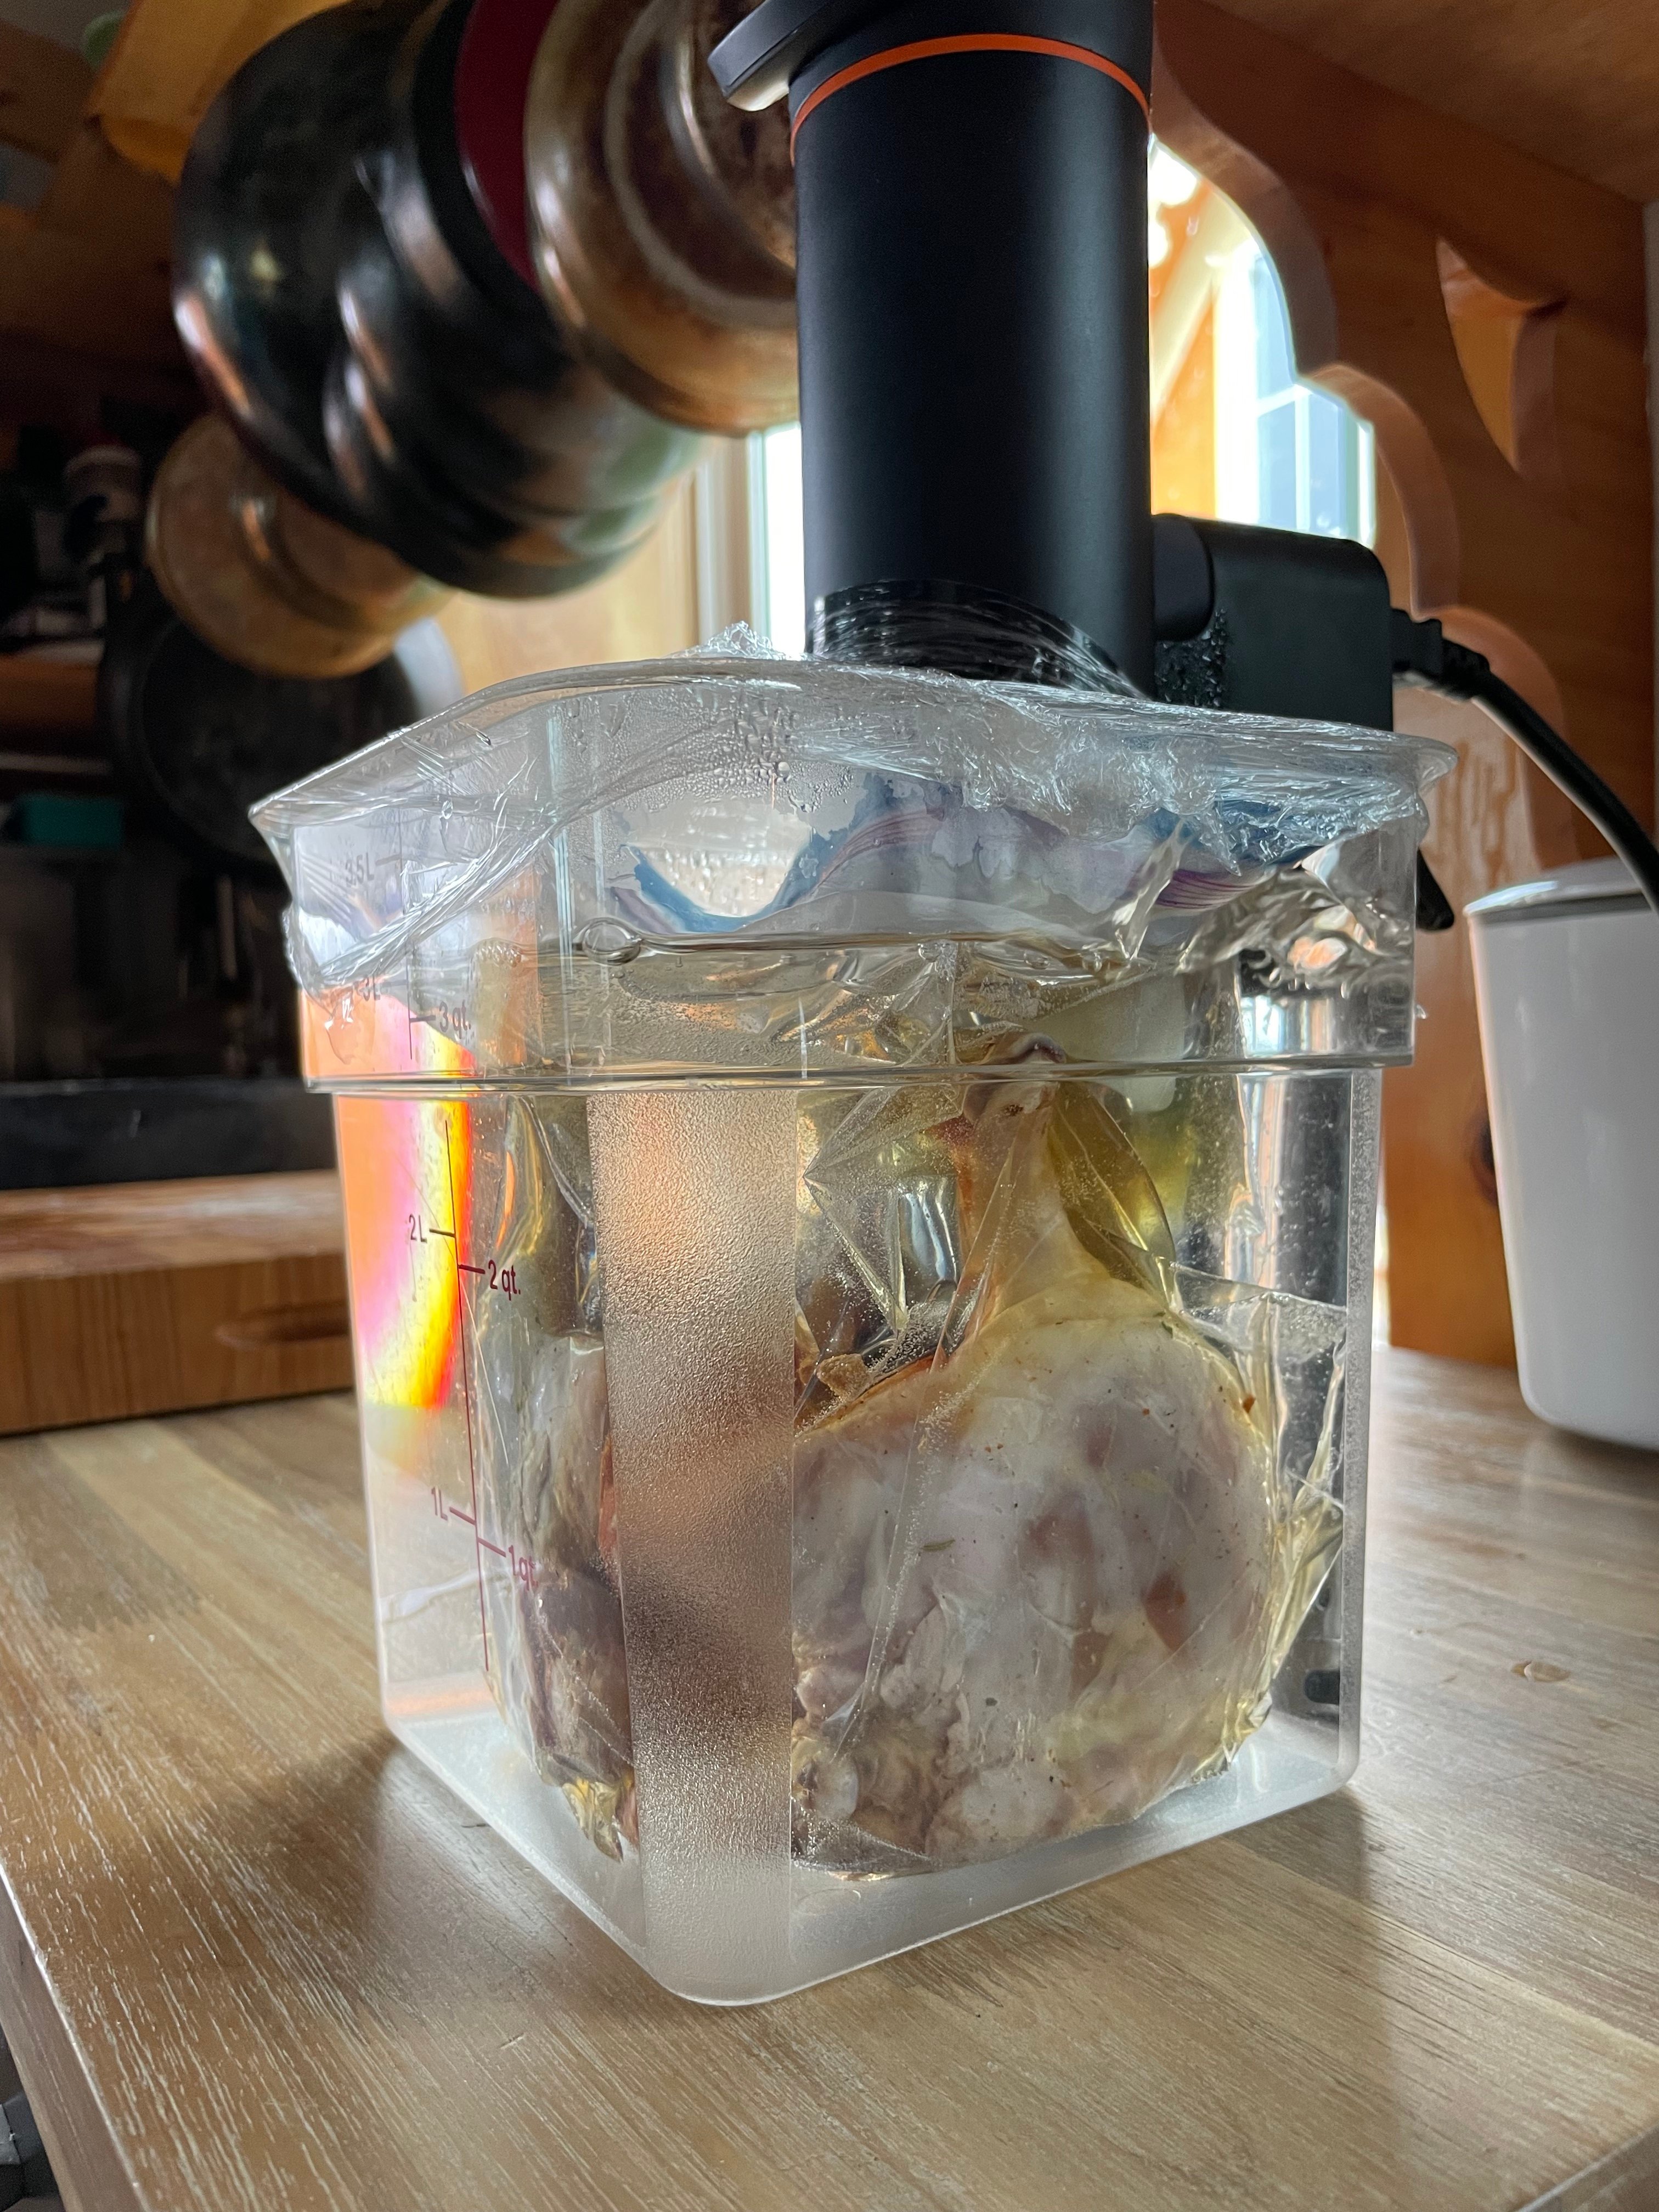 Confit vs. Sous Vide: What's the Difference?